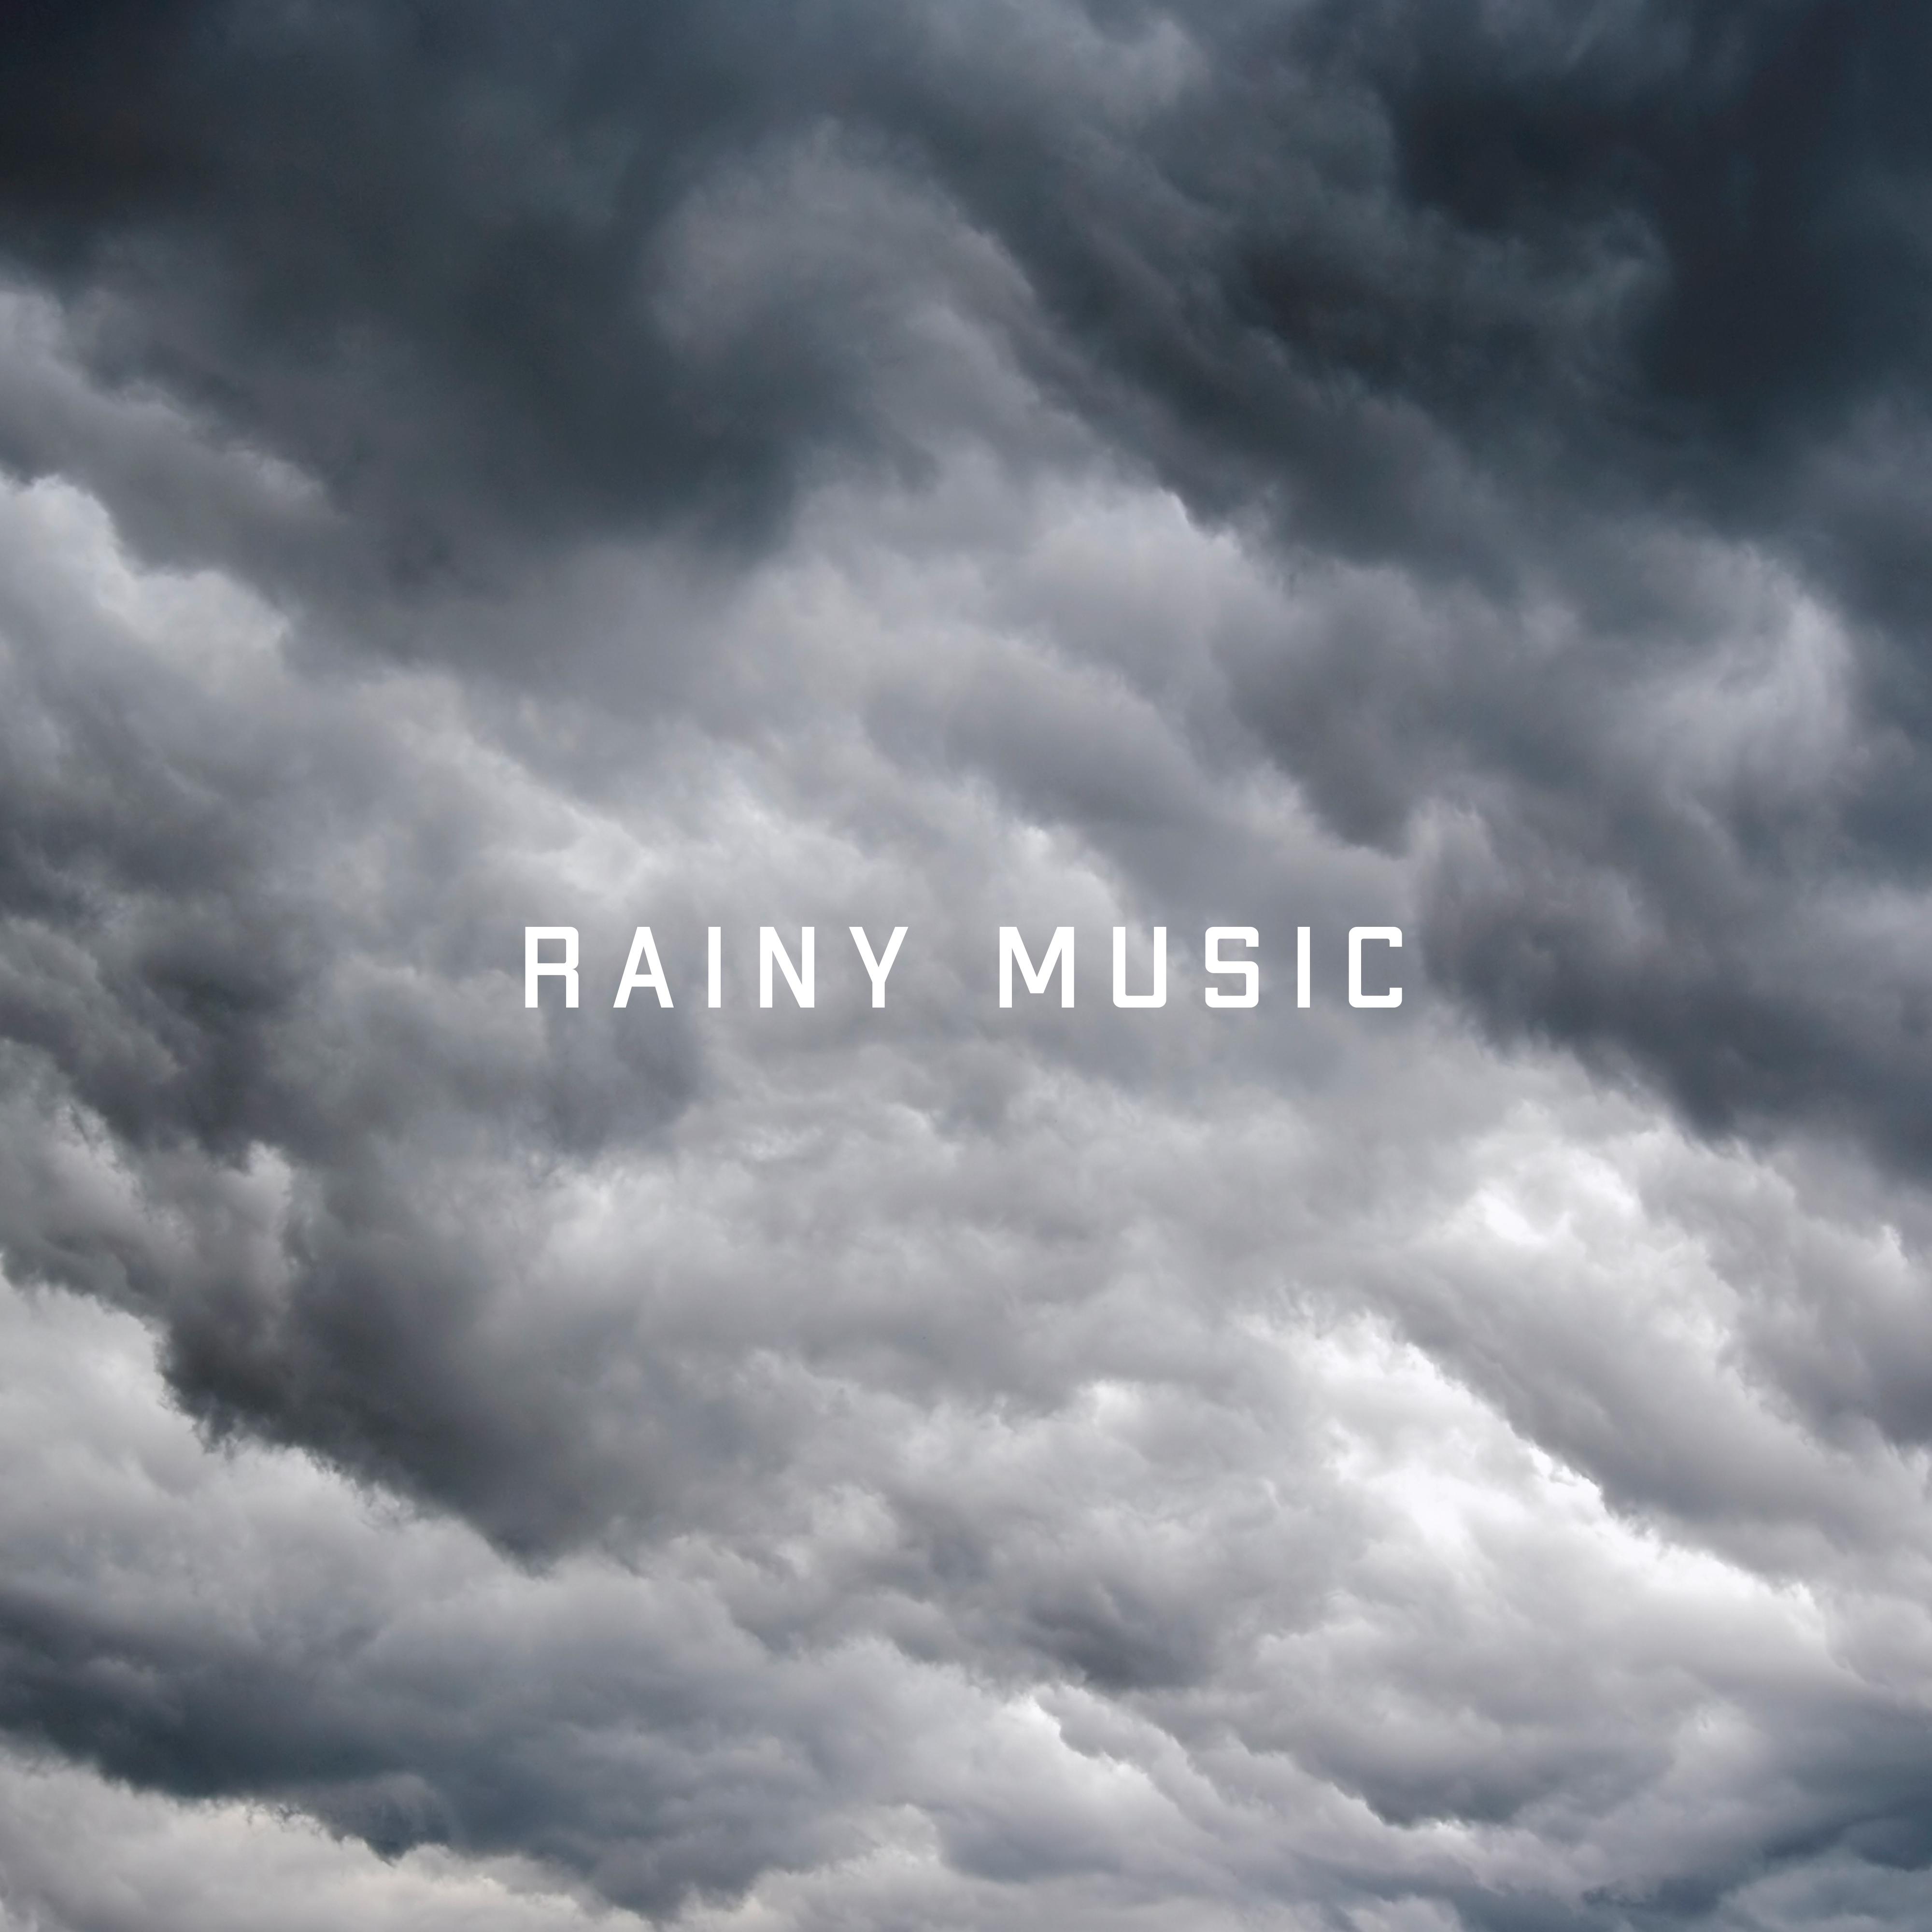 Rainy Music: 15 Universal Songs for Sleep, Relaxation, Studying, Concentration, Car Travel, Baby Sleep, Meditation, Yoga Exercises and Many Others (Music of Nature and Sounds of Rain)